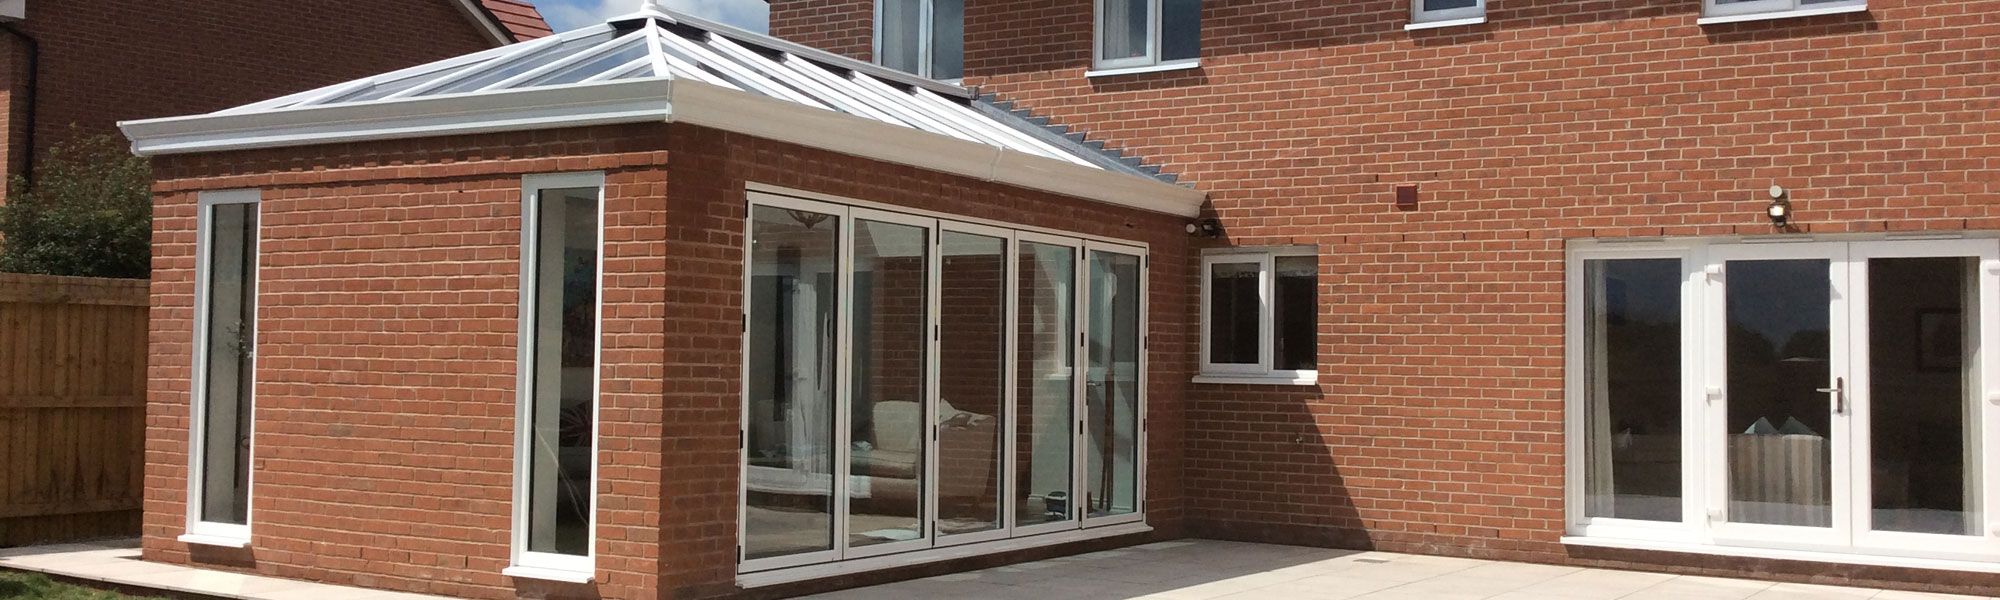 Modern conservatory fitted at house in Wrexham, North Wales